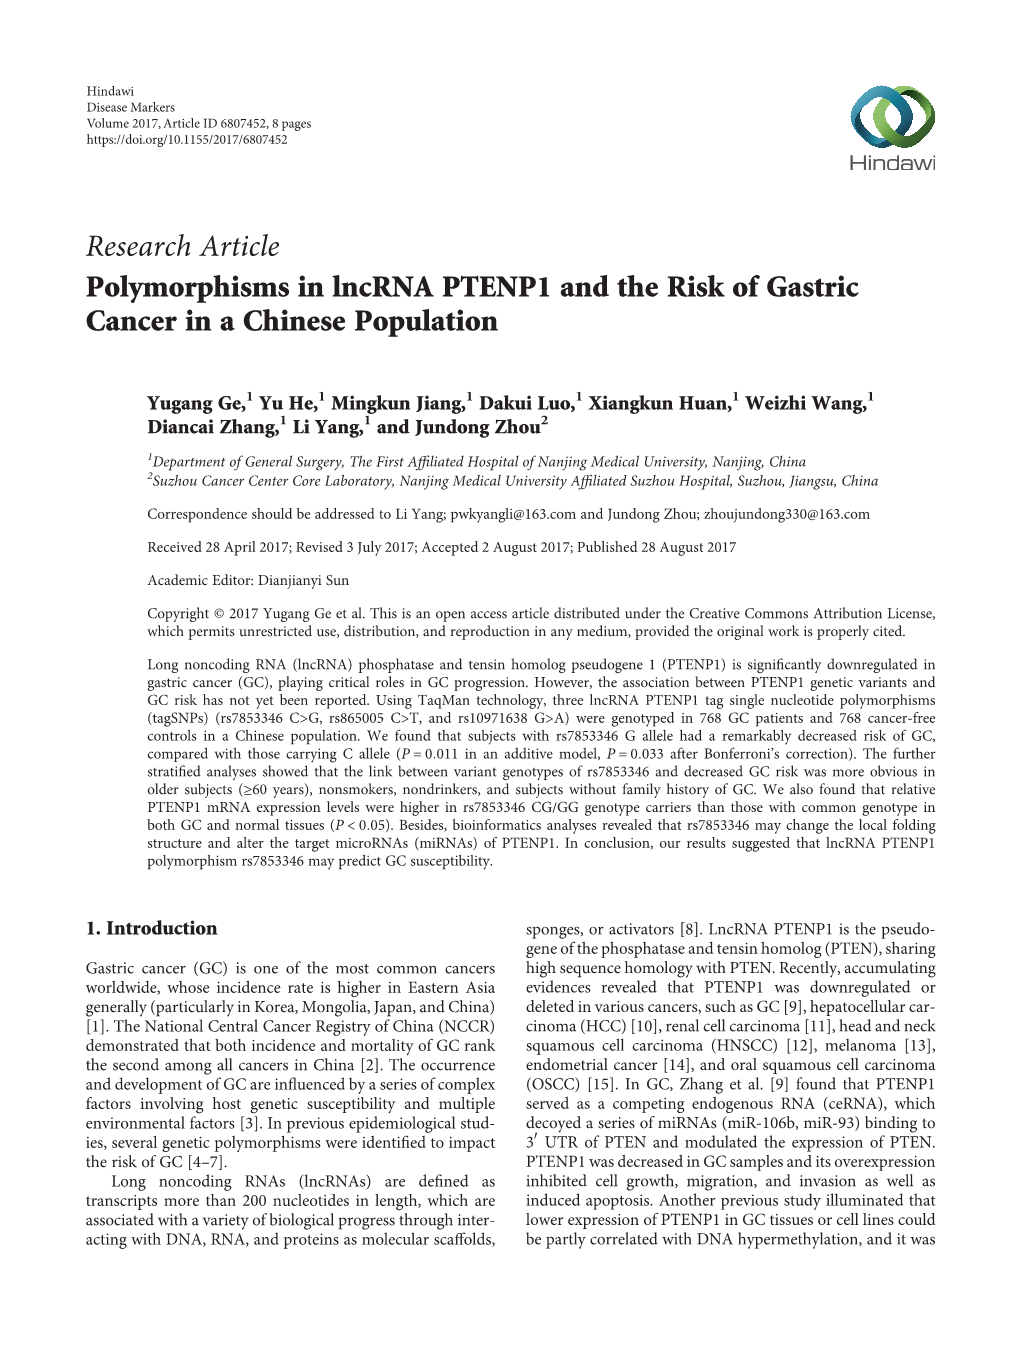 Polymorphisms in Lncrna PTENP1 and the Risk of Gastric Cancer in a Chinese Population